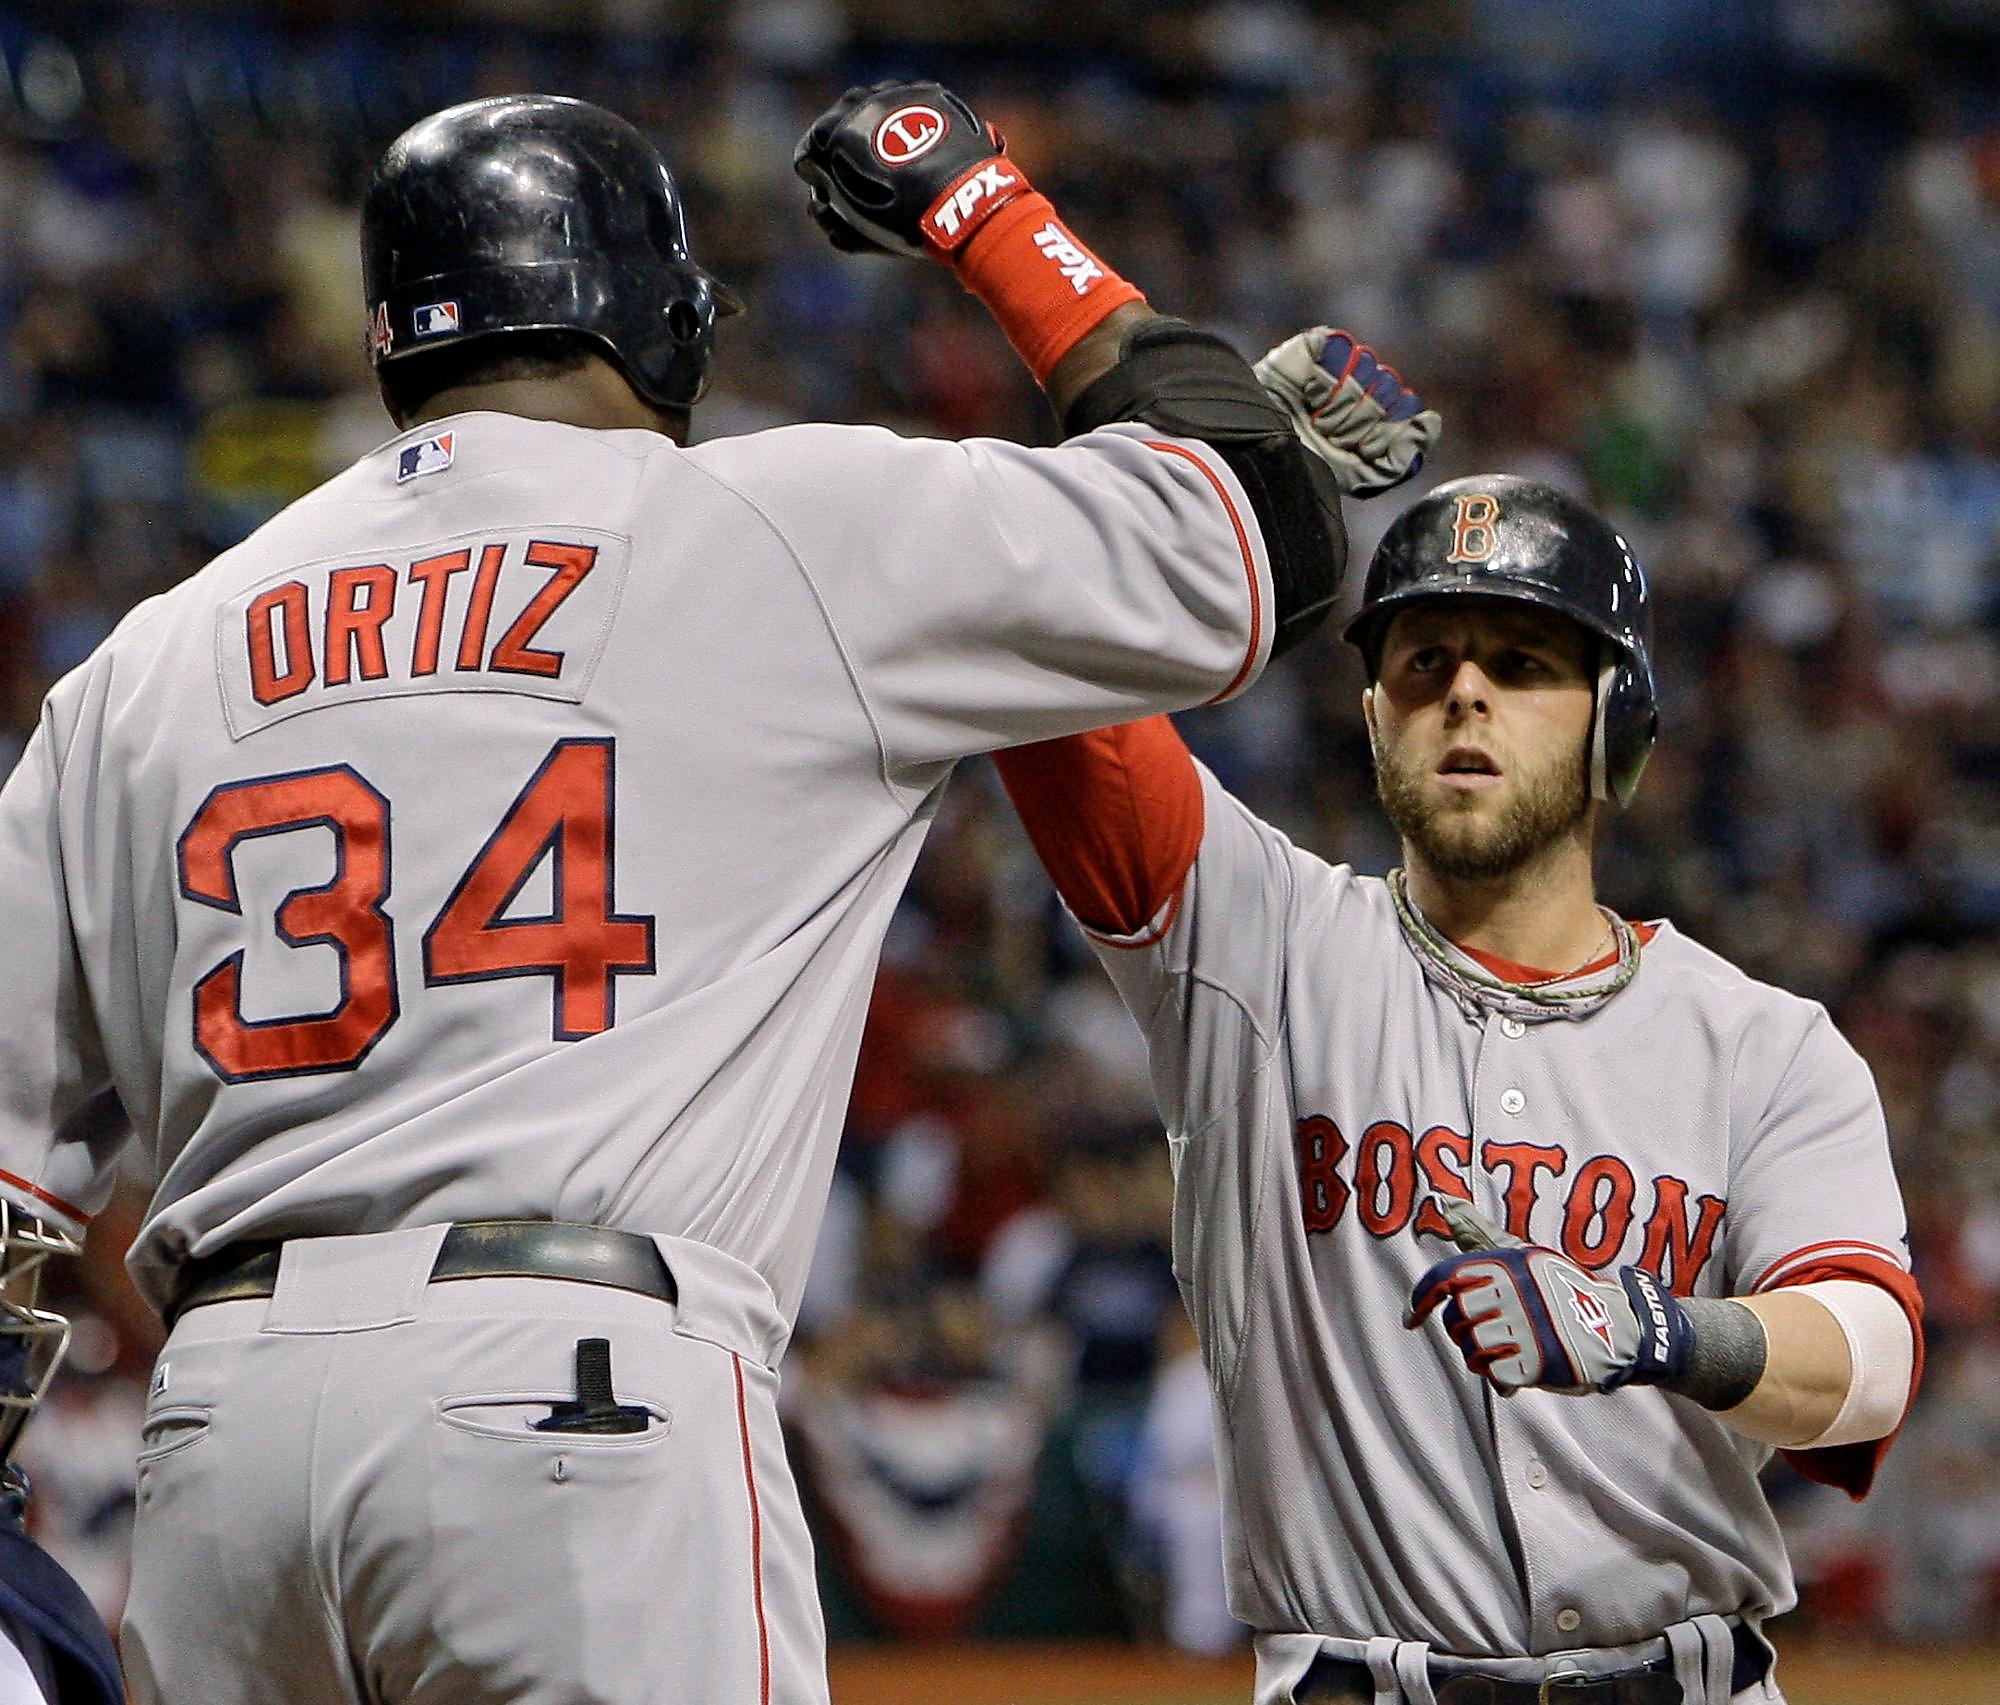 Red Sox to honor retired 2nd baseman Dustin Pedroia